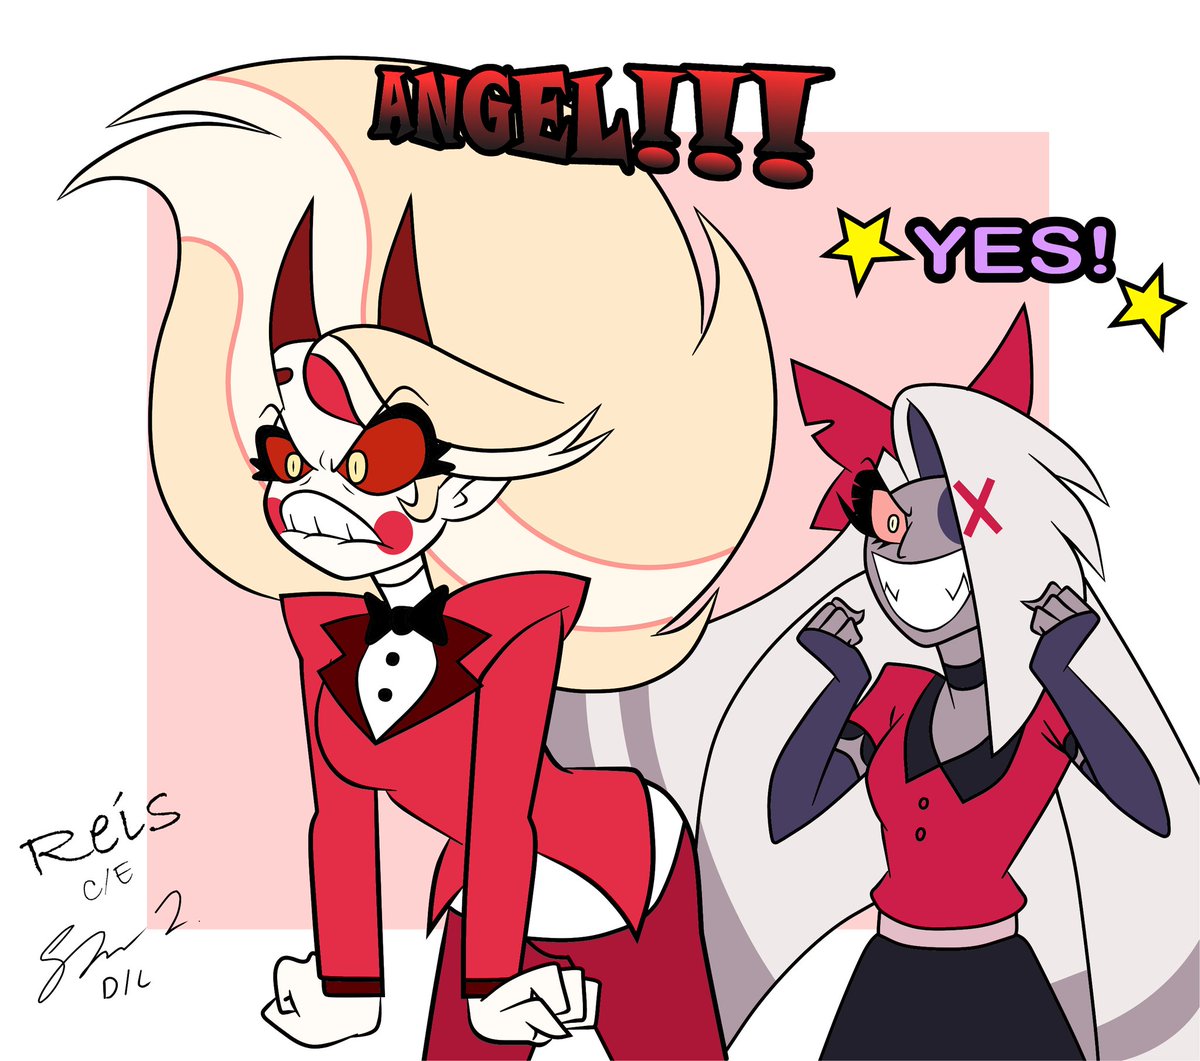 Future prediction for Hazbin Hotel! At some point, the princess isn't going to put up with Angel anymore

#ChatStories
#sherryandreisy #hazbinhotelangel #hazbinhotelart #hazbinhotelcharlie #hazbinhotel #hazbinhotelvaggie #hazbinhotelfandom #hazbinhotelfanart #hazbinhotelangeldust